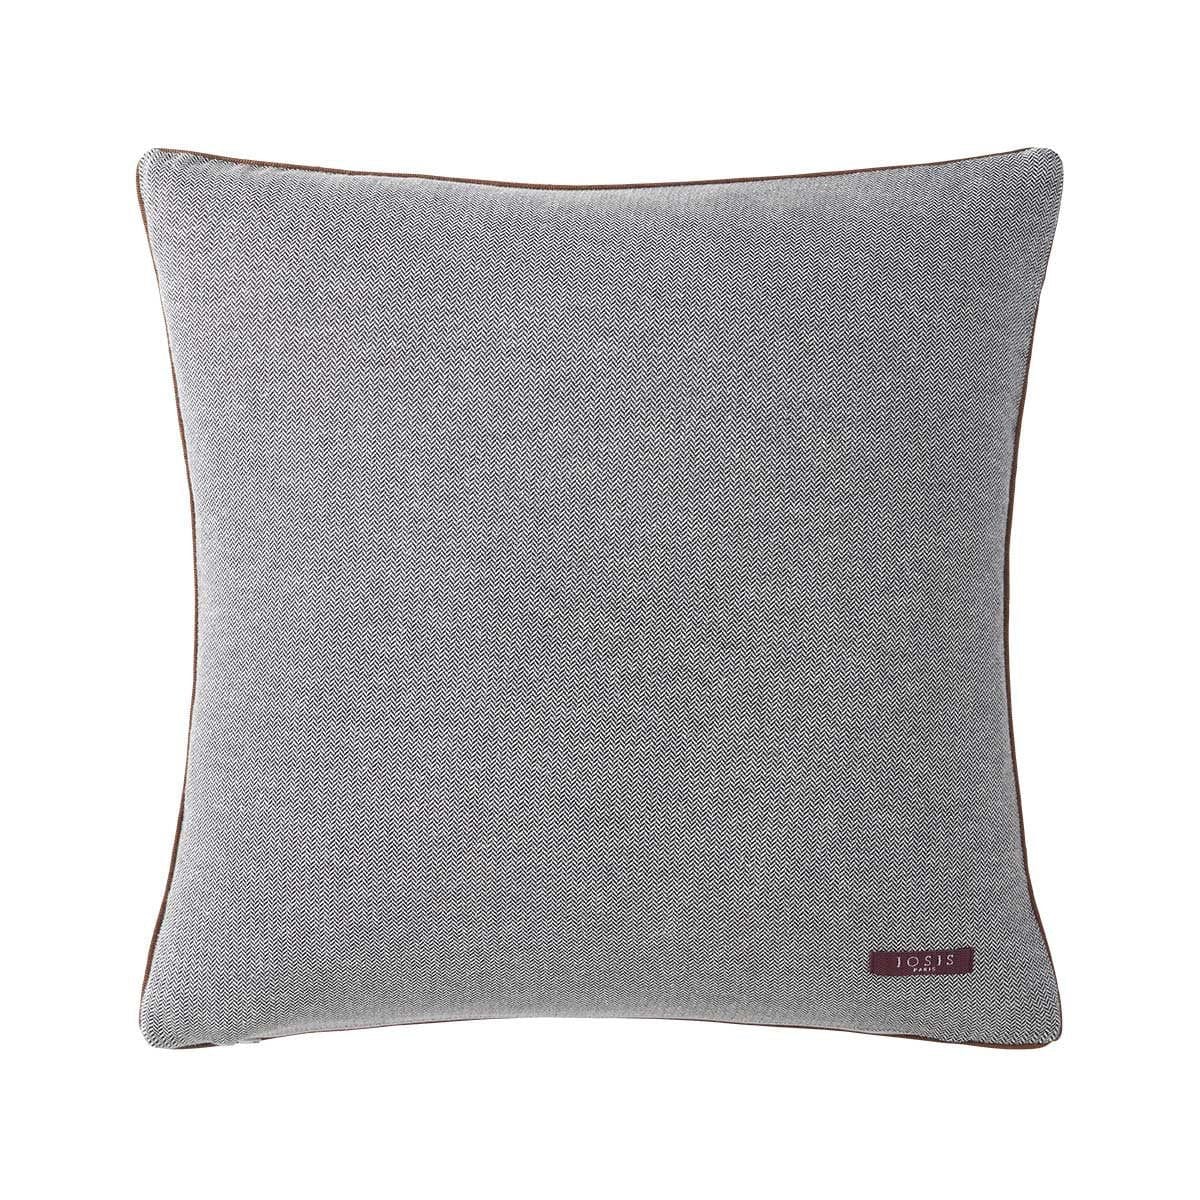 Decorative Pillows Iosis Japura Decorative Pillow by Yves Delorme Yves Delorme